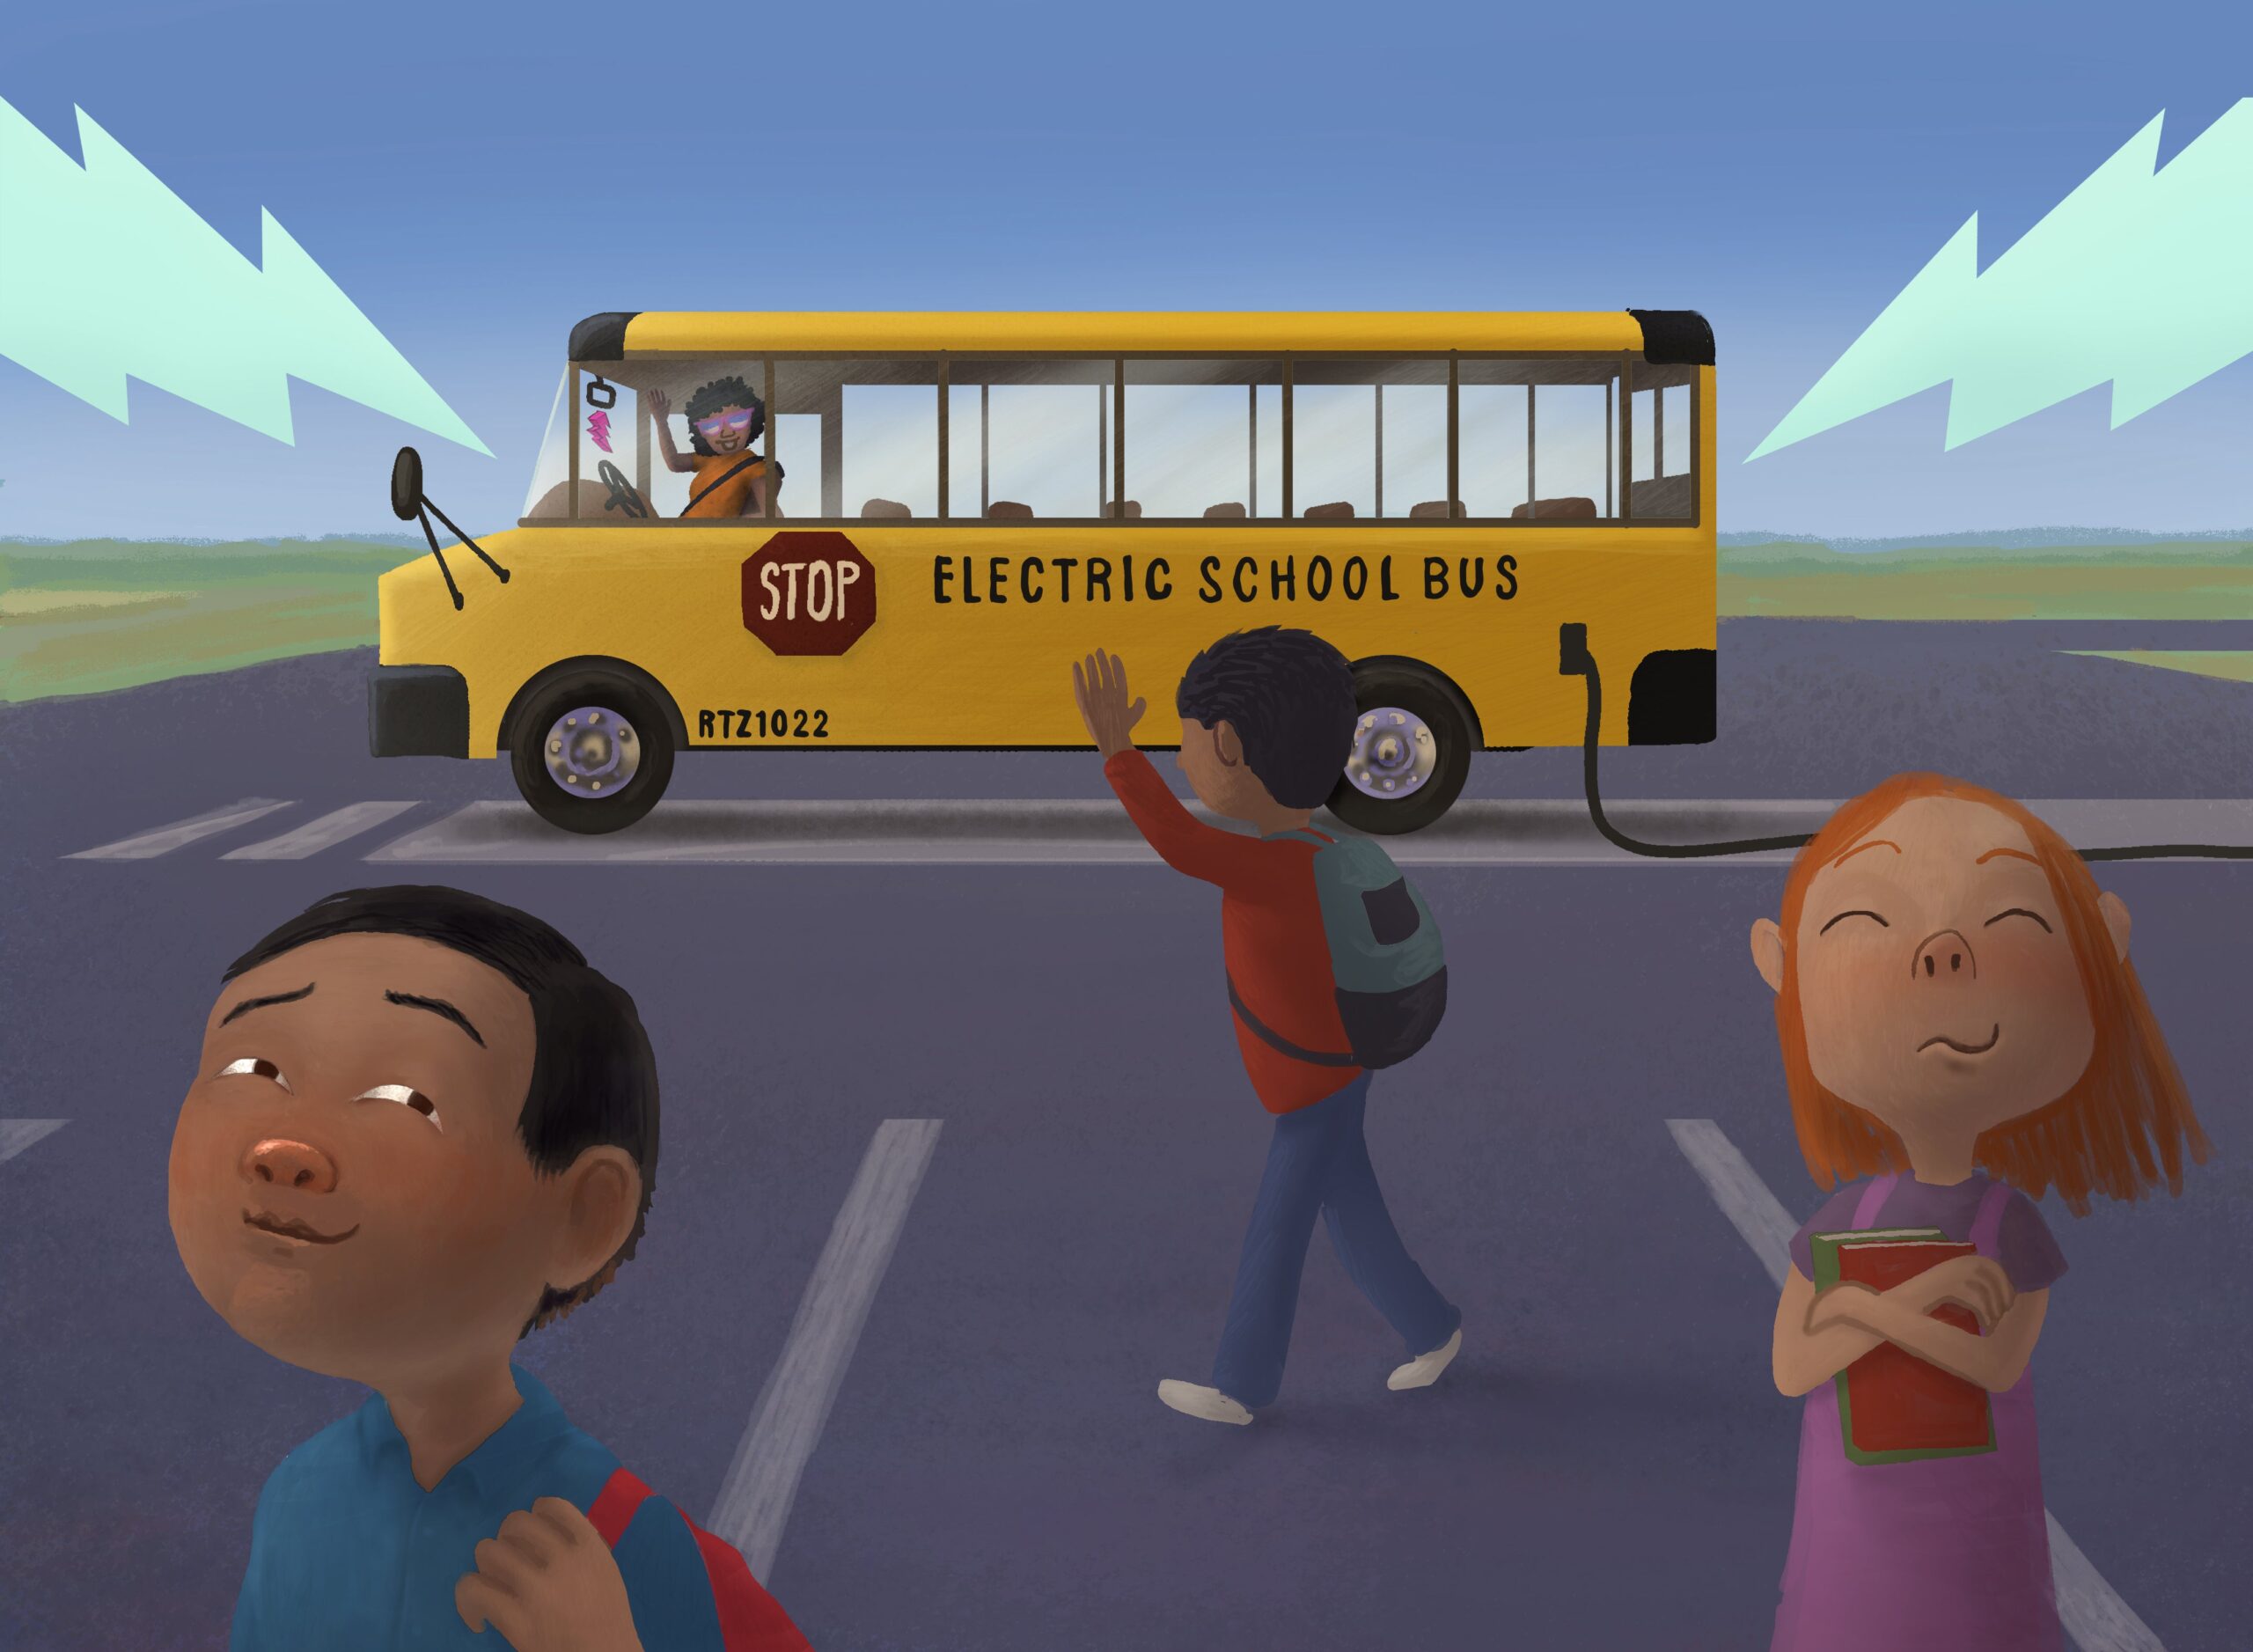 Electric school buses would benefit the 25 million school children who ride the bus to school every day in the United States.
(Neal Sharp for Earthjustice)